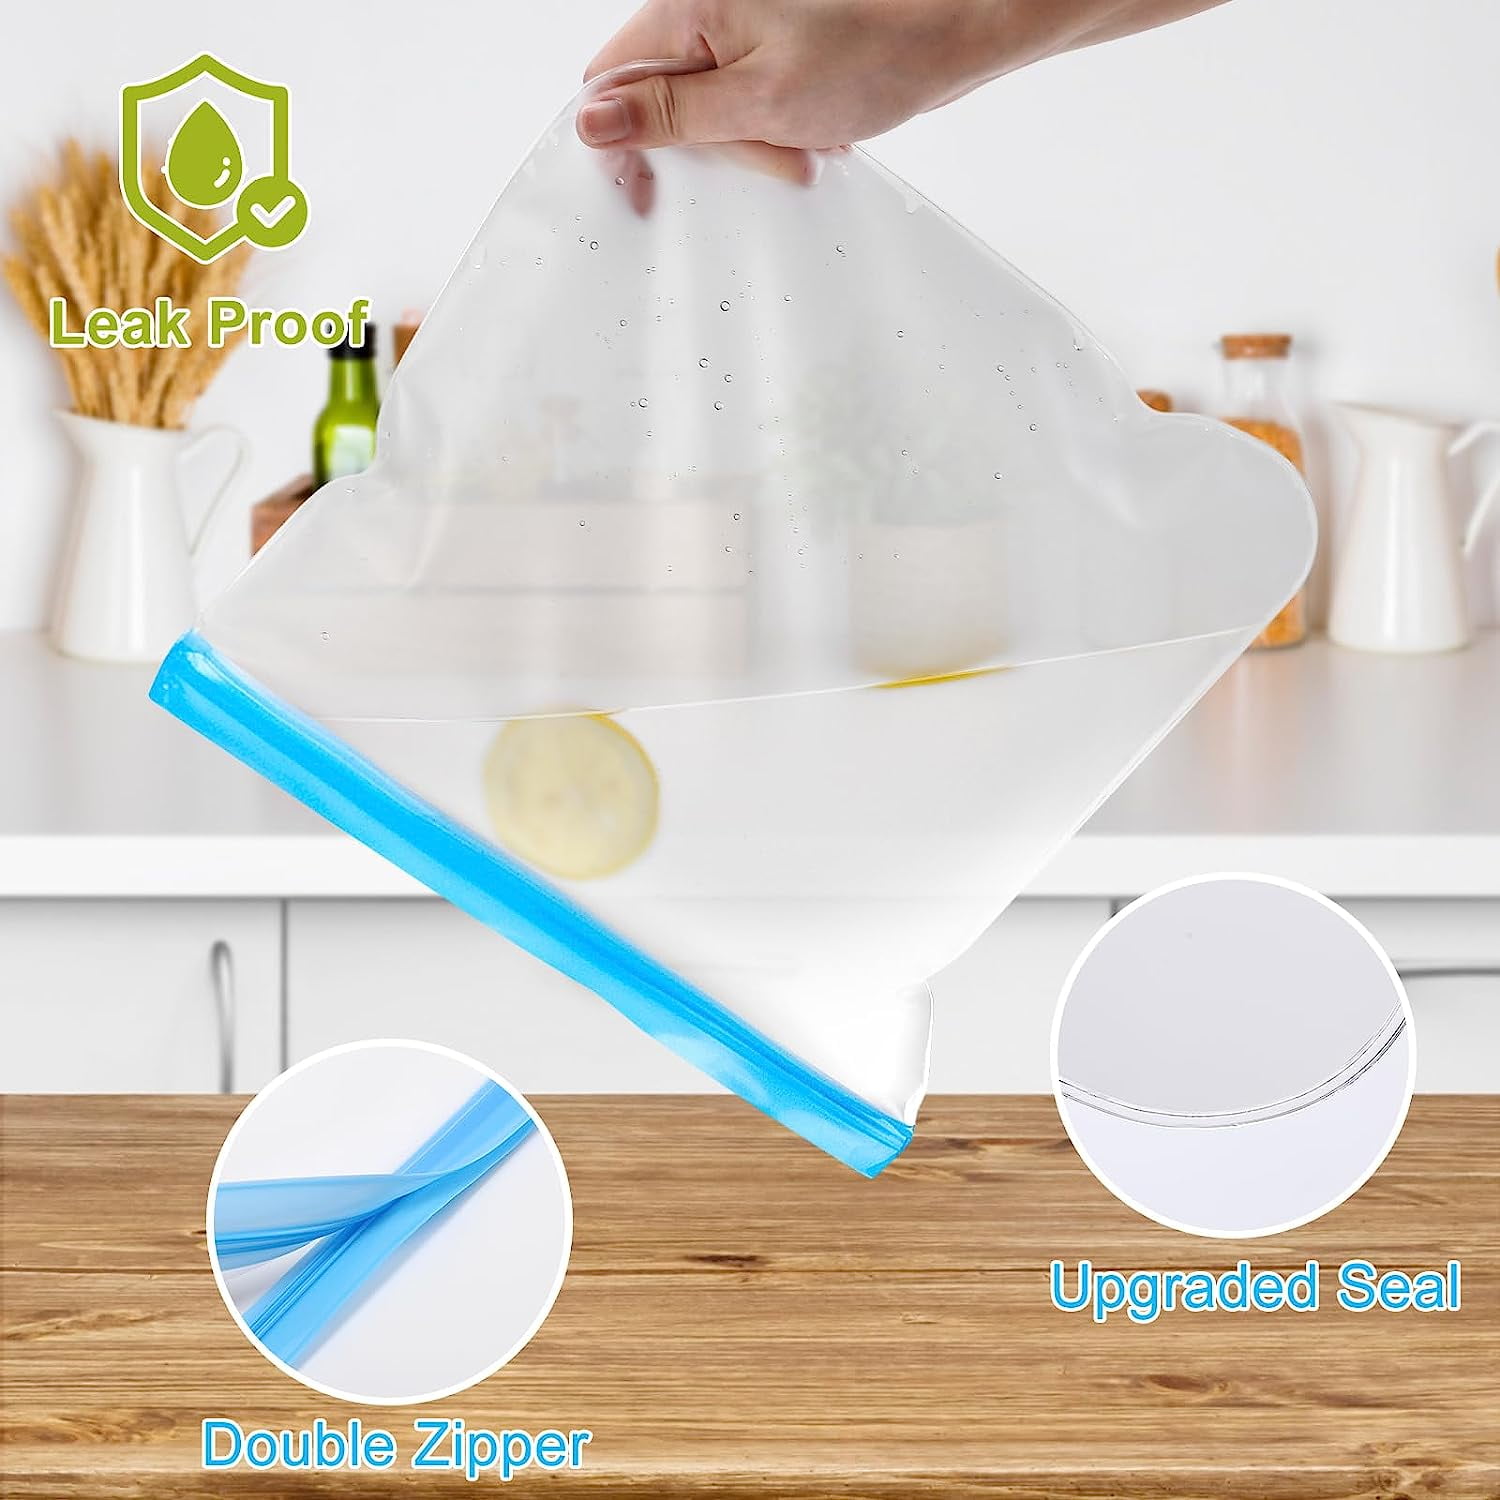 Reusable Snack Bags Dishwasher Safe,9 Pack Reusable Ziplock Bags Silicone  Extra Thick Leak-proof Reusable Food Storage Bags for Candy, Snack, Sandwich,  Cereal, Travel Items, Home Organization 